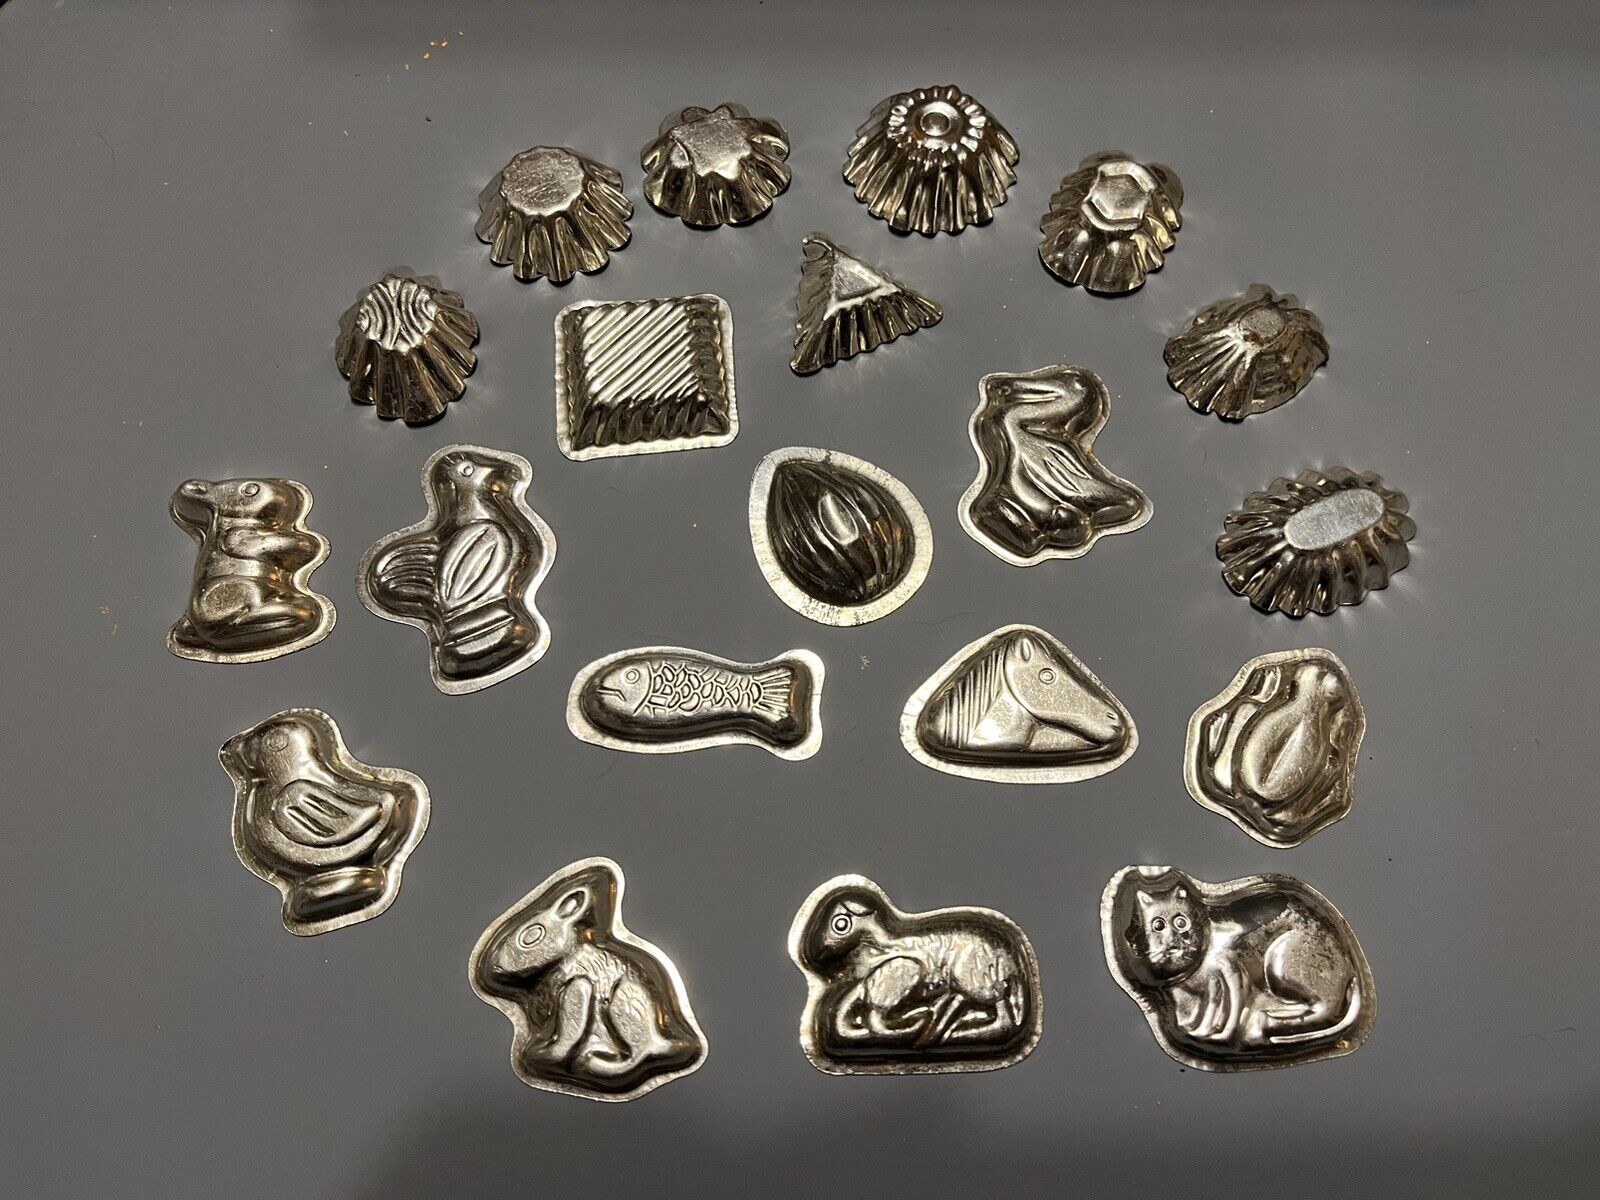 Vintage Lot Of 20 Metal Candy/Chocolate Molds- Small, Shapes And Animals